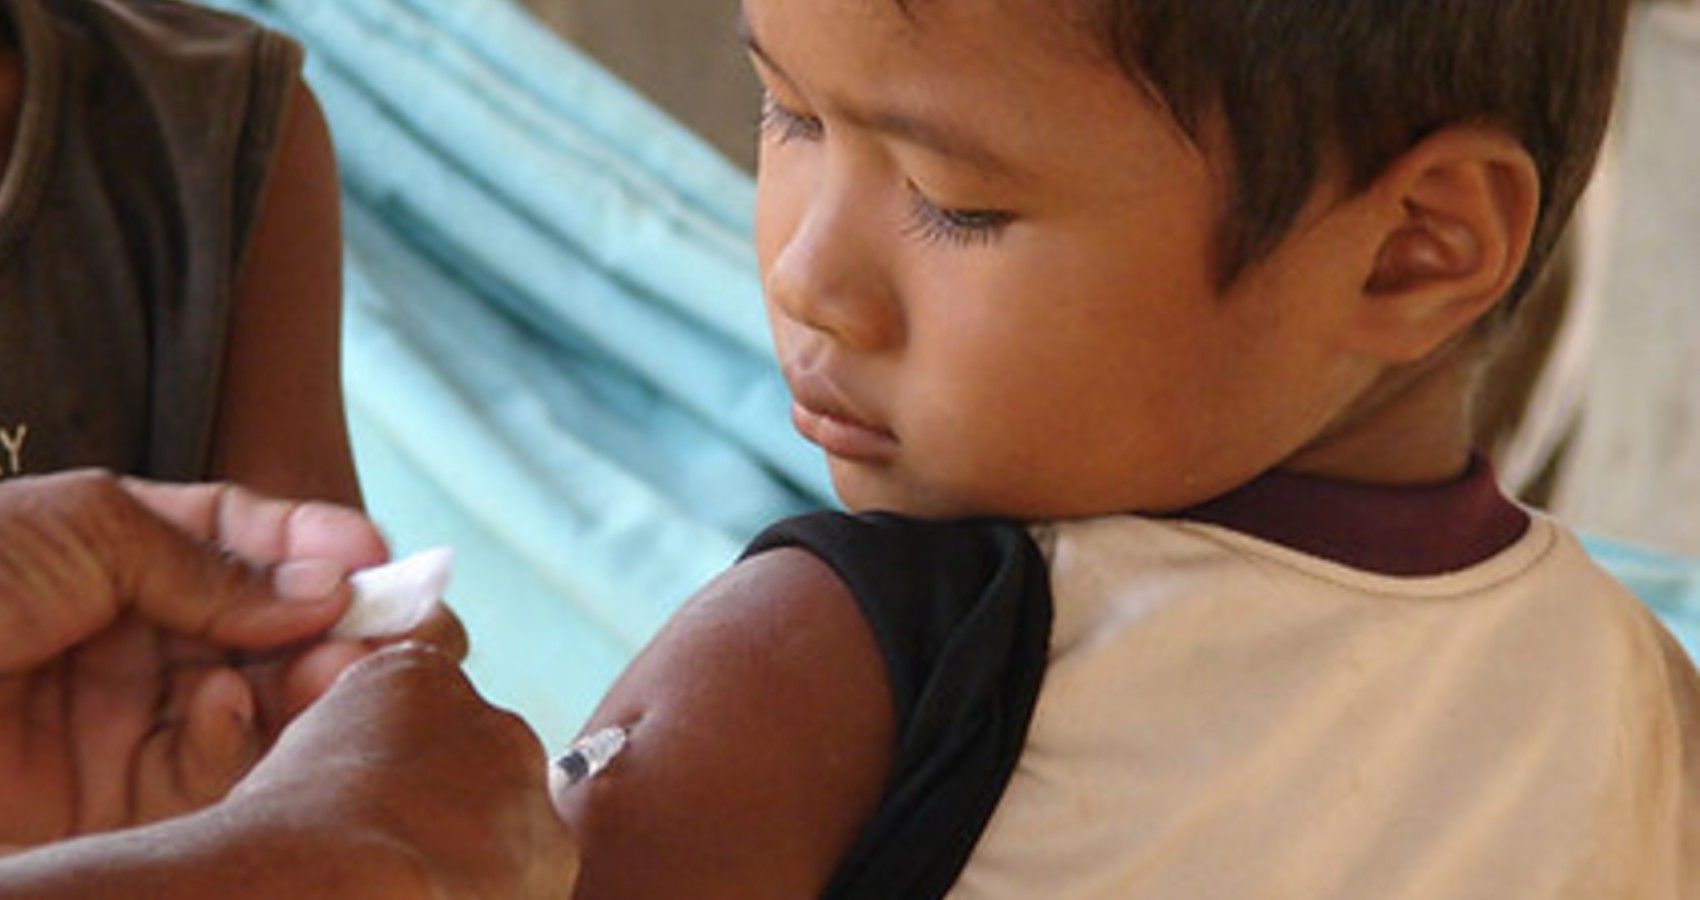 A child receiving the measles vaccine